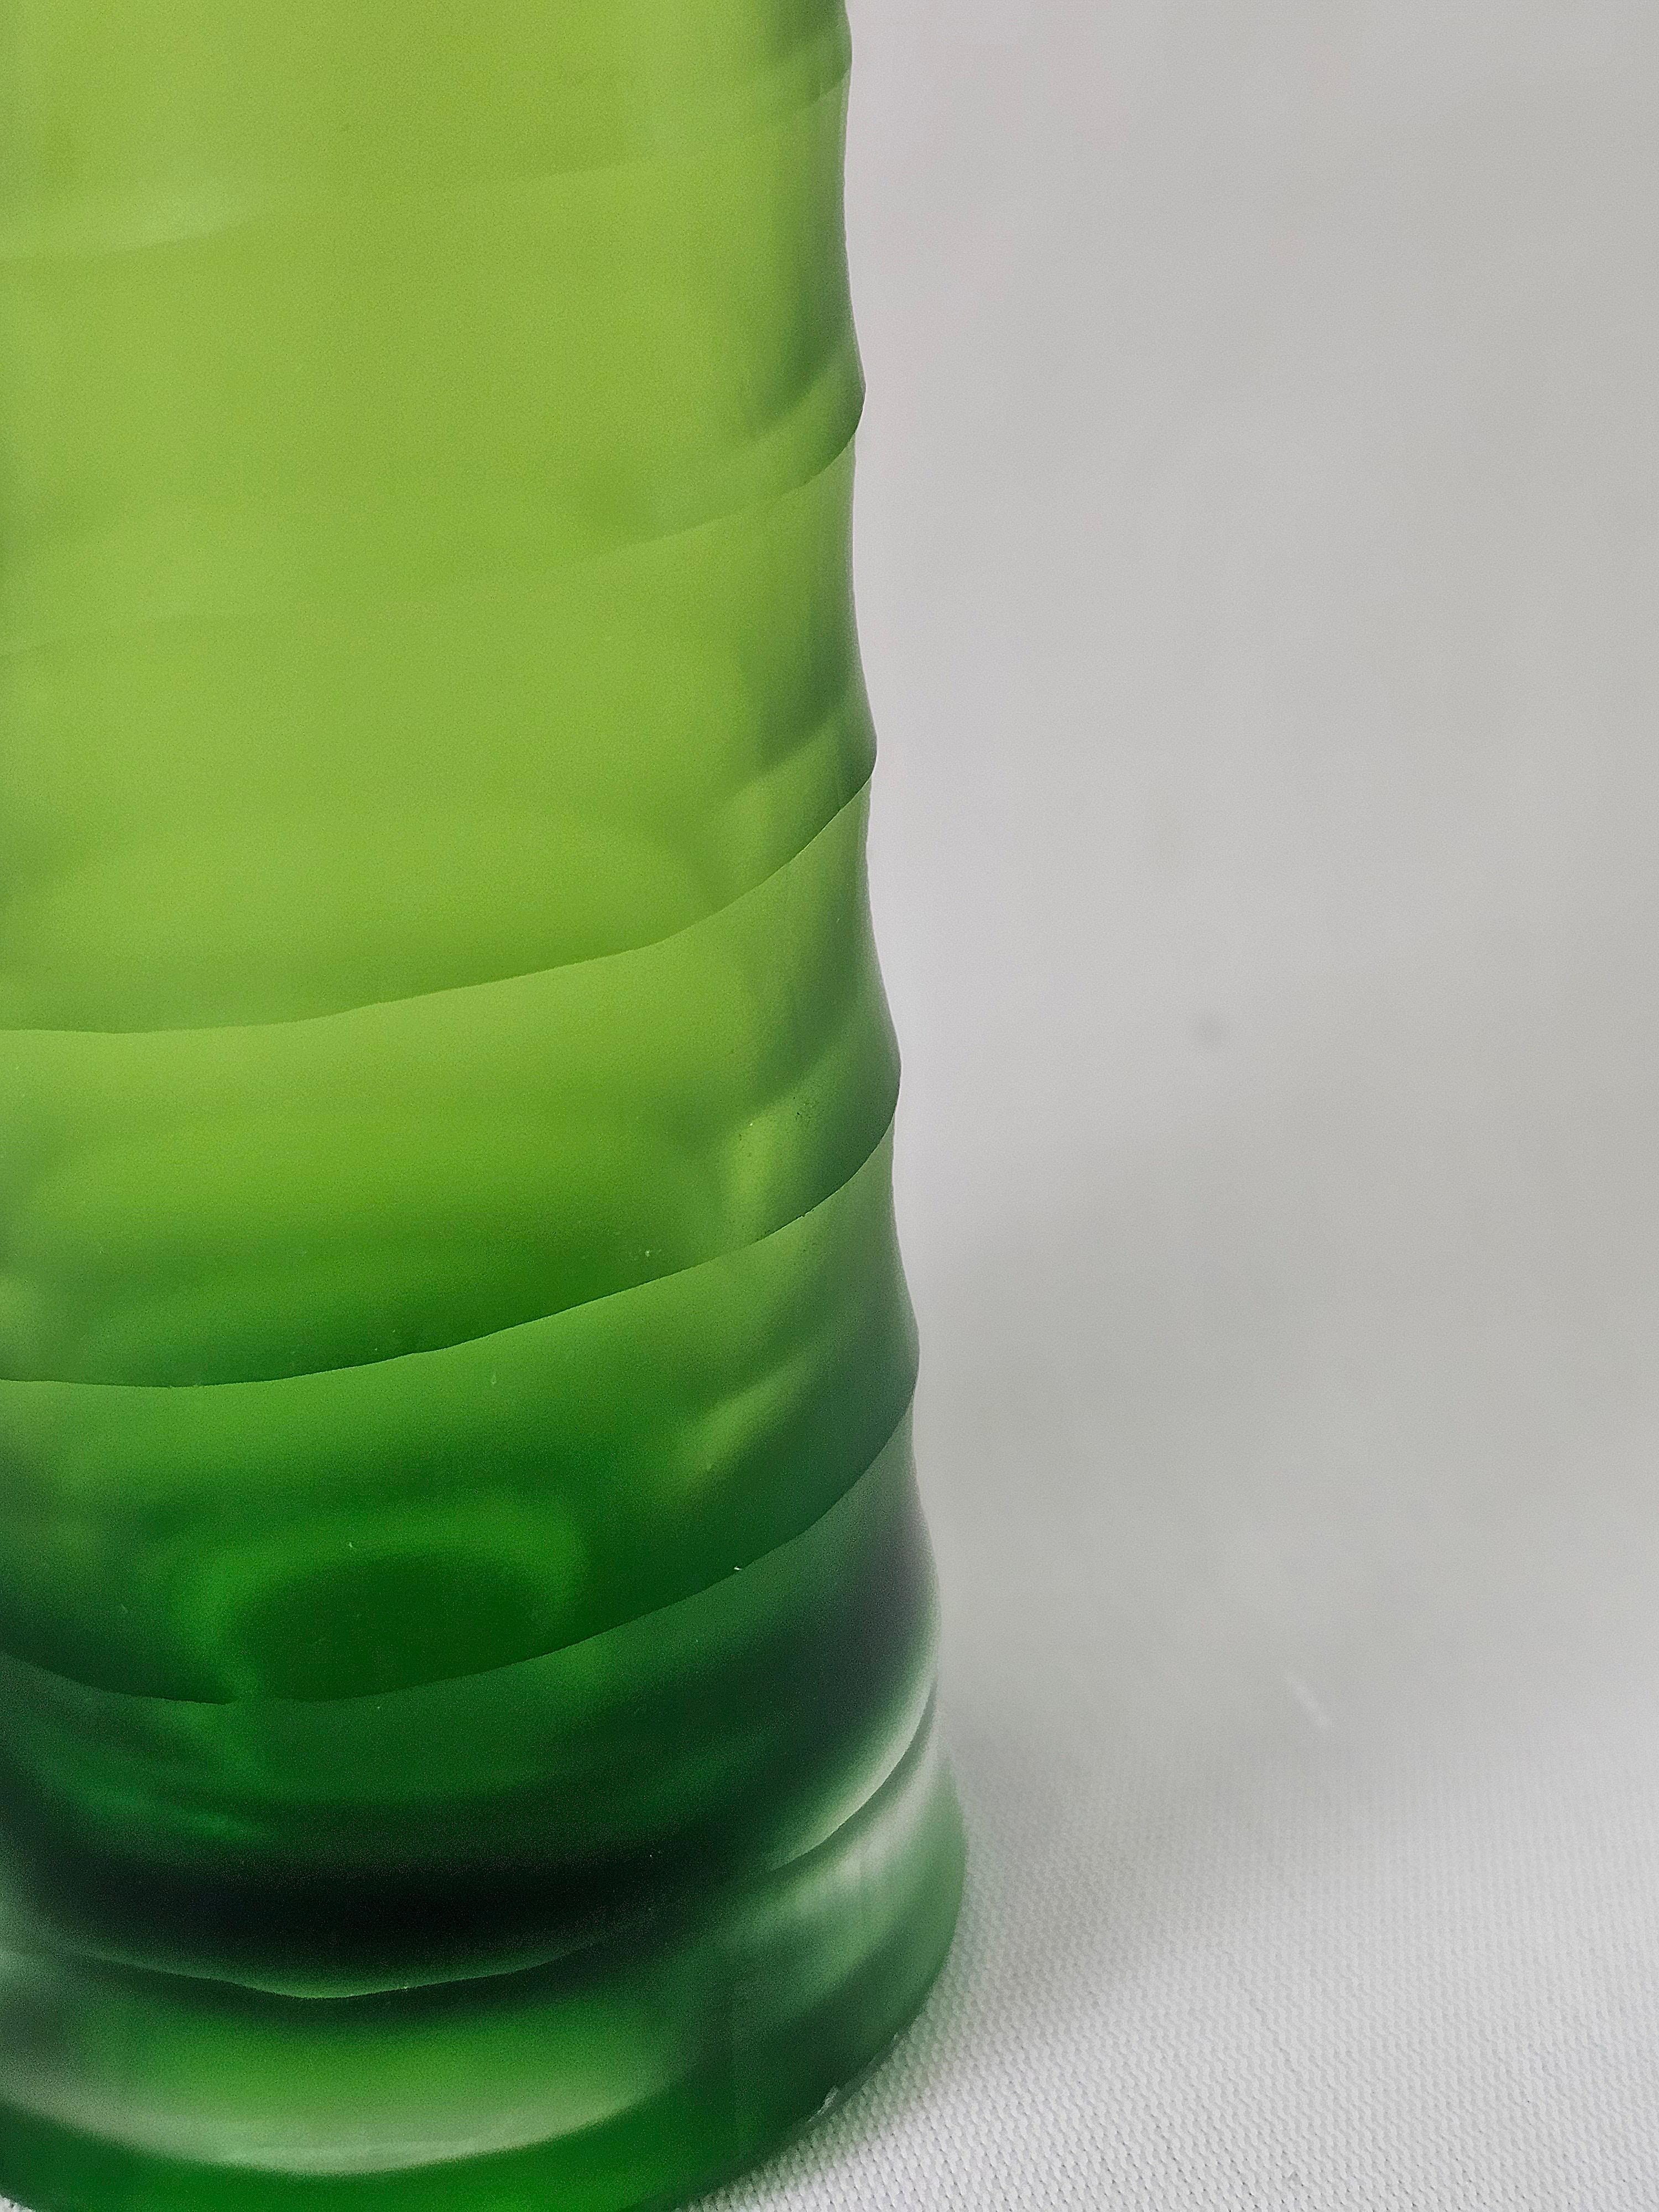 Vase Decorative Object Murano Glass Green Midcentury Modern Italian Design 1970s In Good Condition For Sale In Palermo, IT